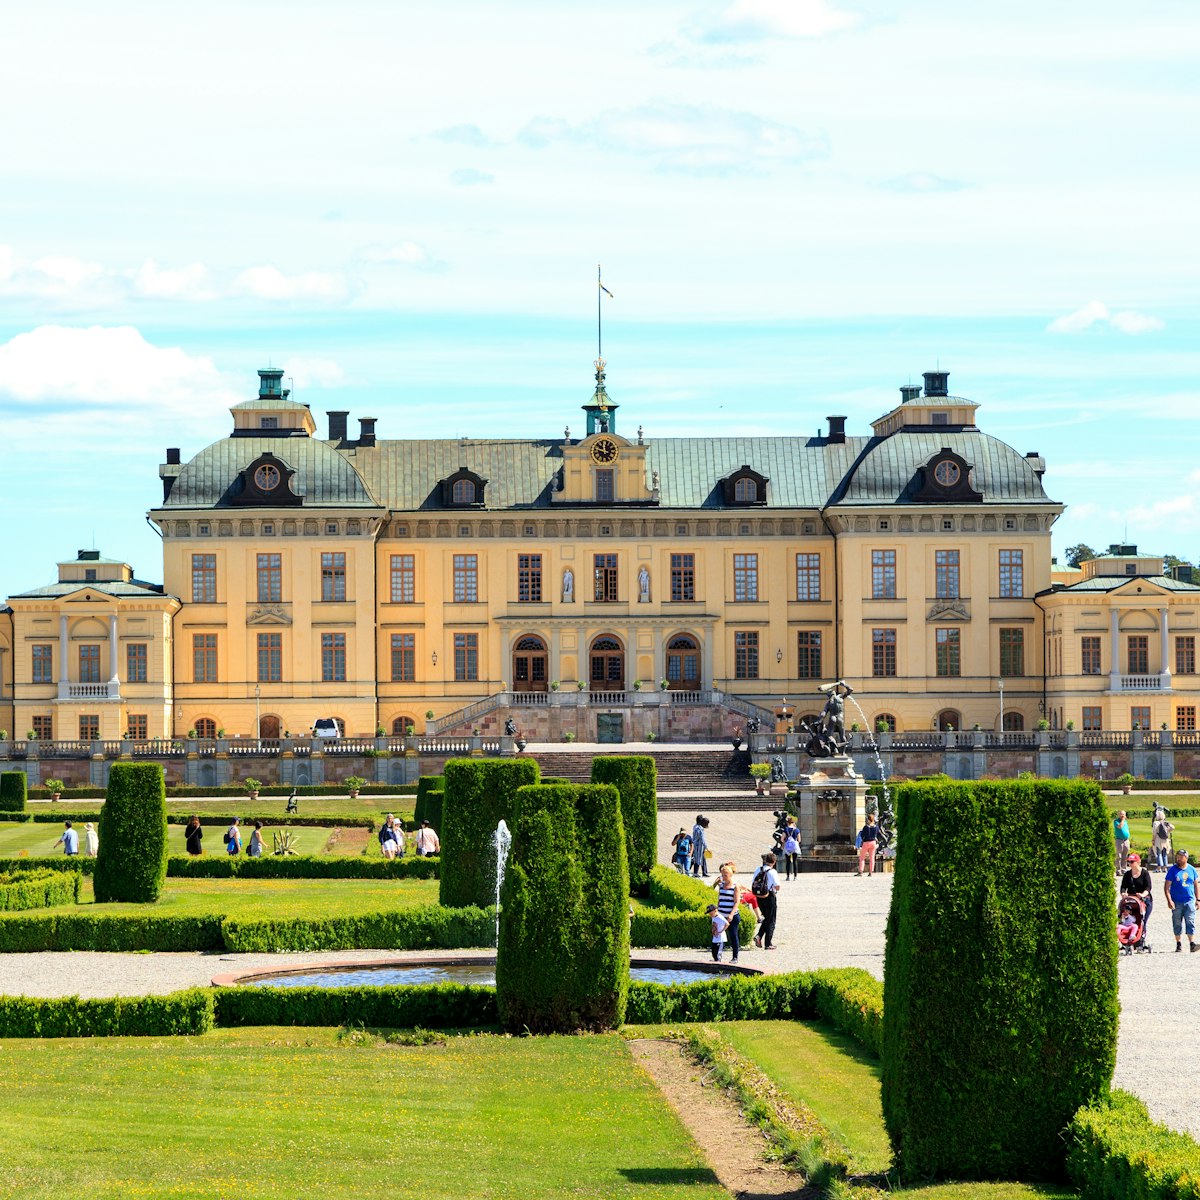 Drottningholm Palace and garden.